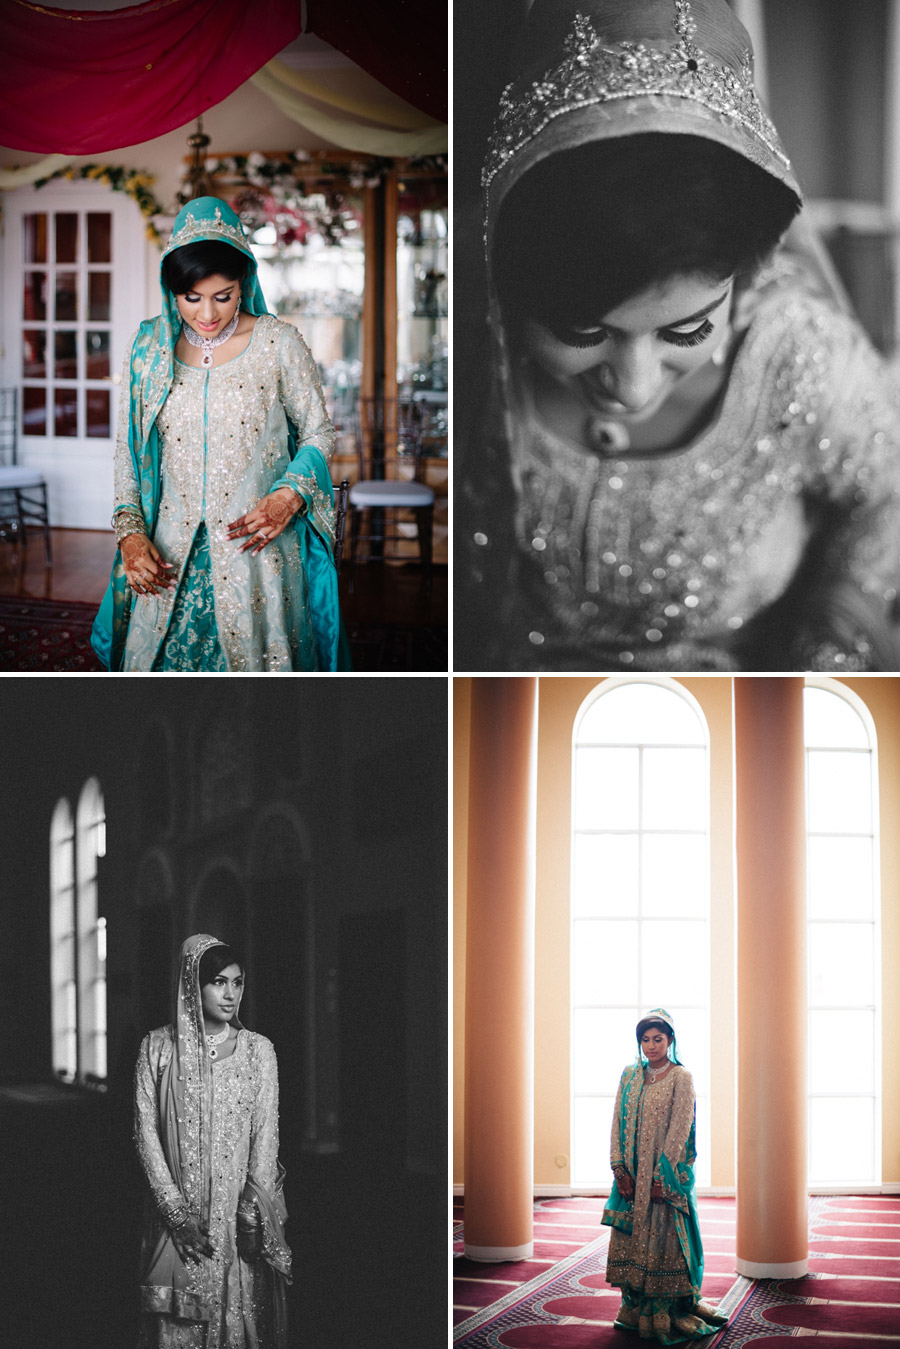  Pakistani wedding in Montreal. Montreal and Toronto wedding photographer moments of your wedding. Photographing weddings from Toronto to destination weddings around the world. Specializing in photojournalistic approach for wedding couples. Candid an